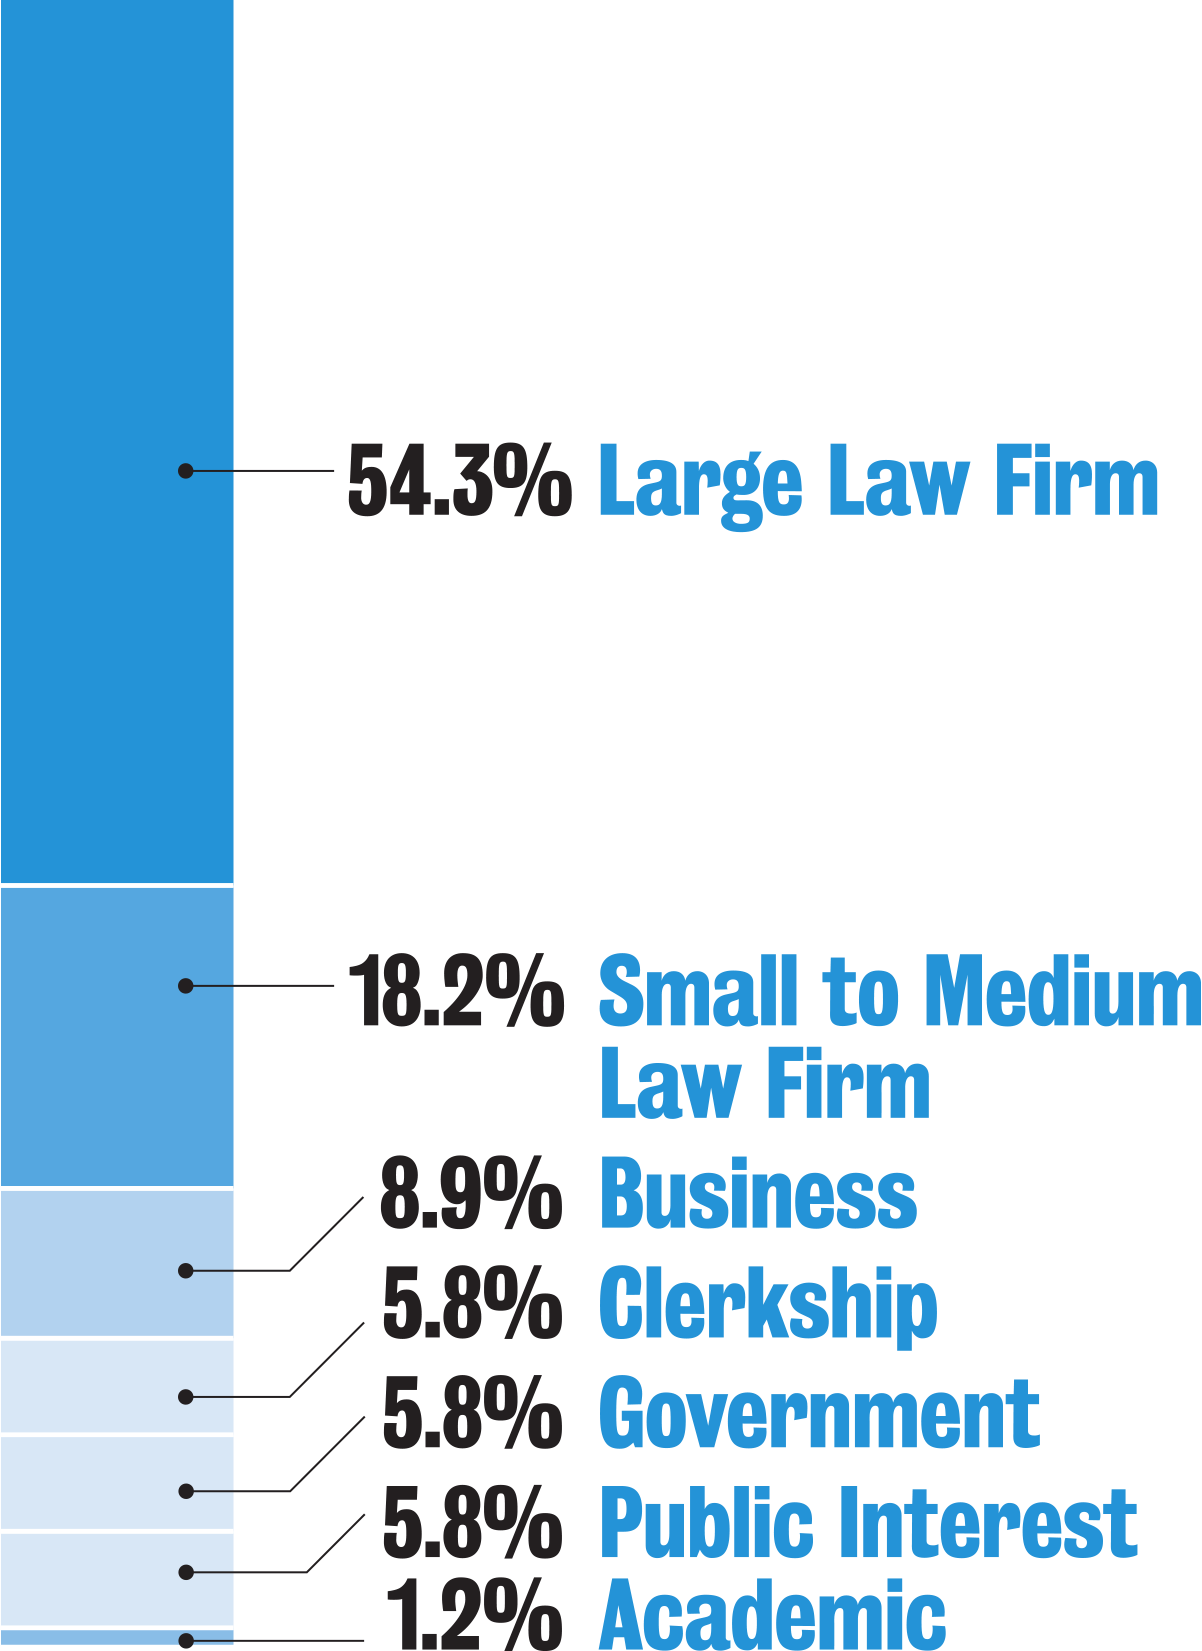 54.3% Large Law Firm, 18.2% Small to Medium Law Firm, 8.9% Business, 5.8% Clerkship, 5.8% Government, 5.8% Public Interest, 1.2% Academic